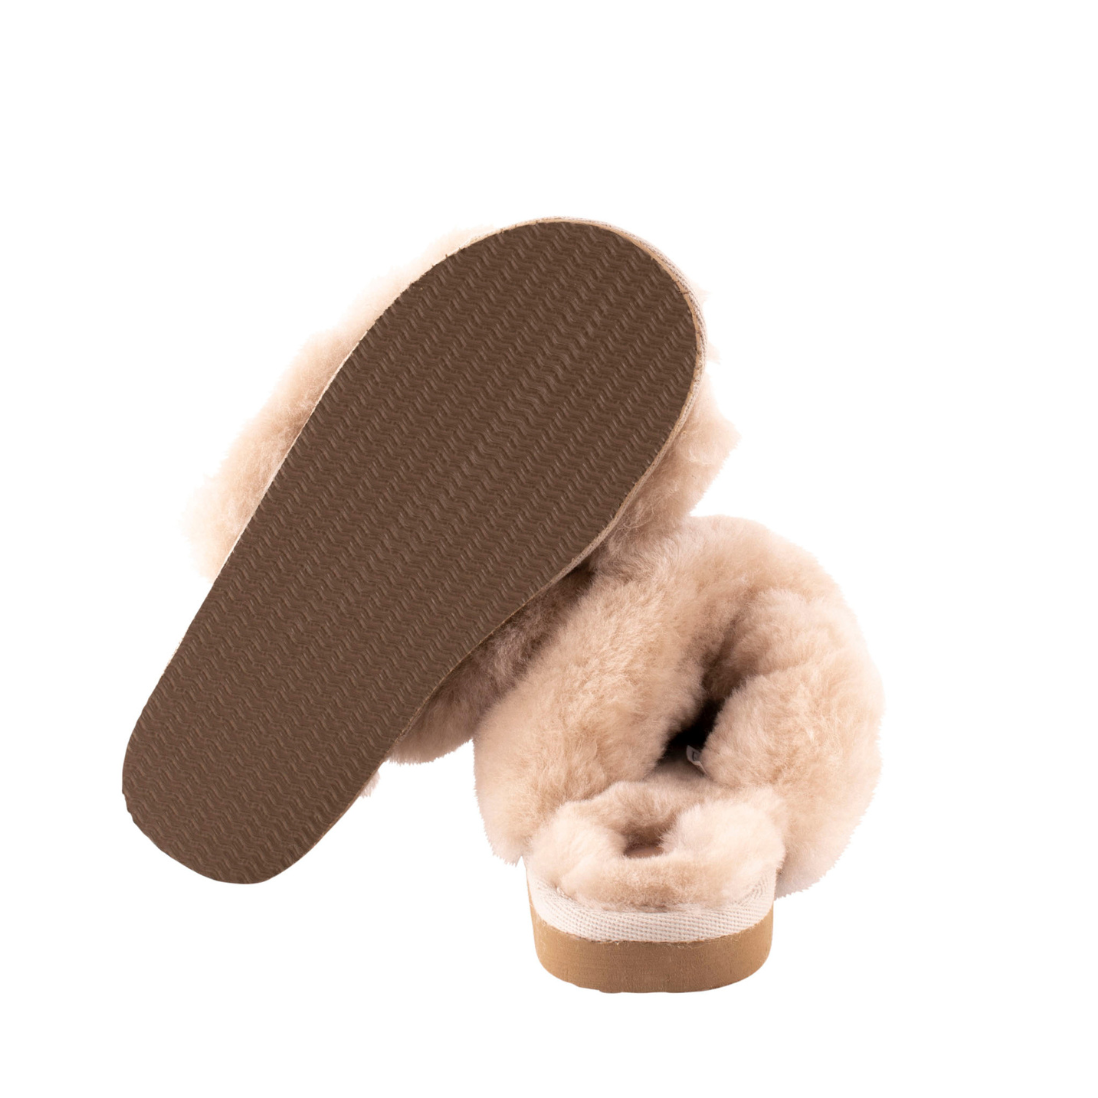 Shepherd of Sweden sheepskin slippers Lovisa in colour honey . Brand new and available to buy in our UK store. Seen here from underneath